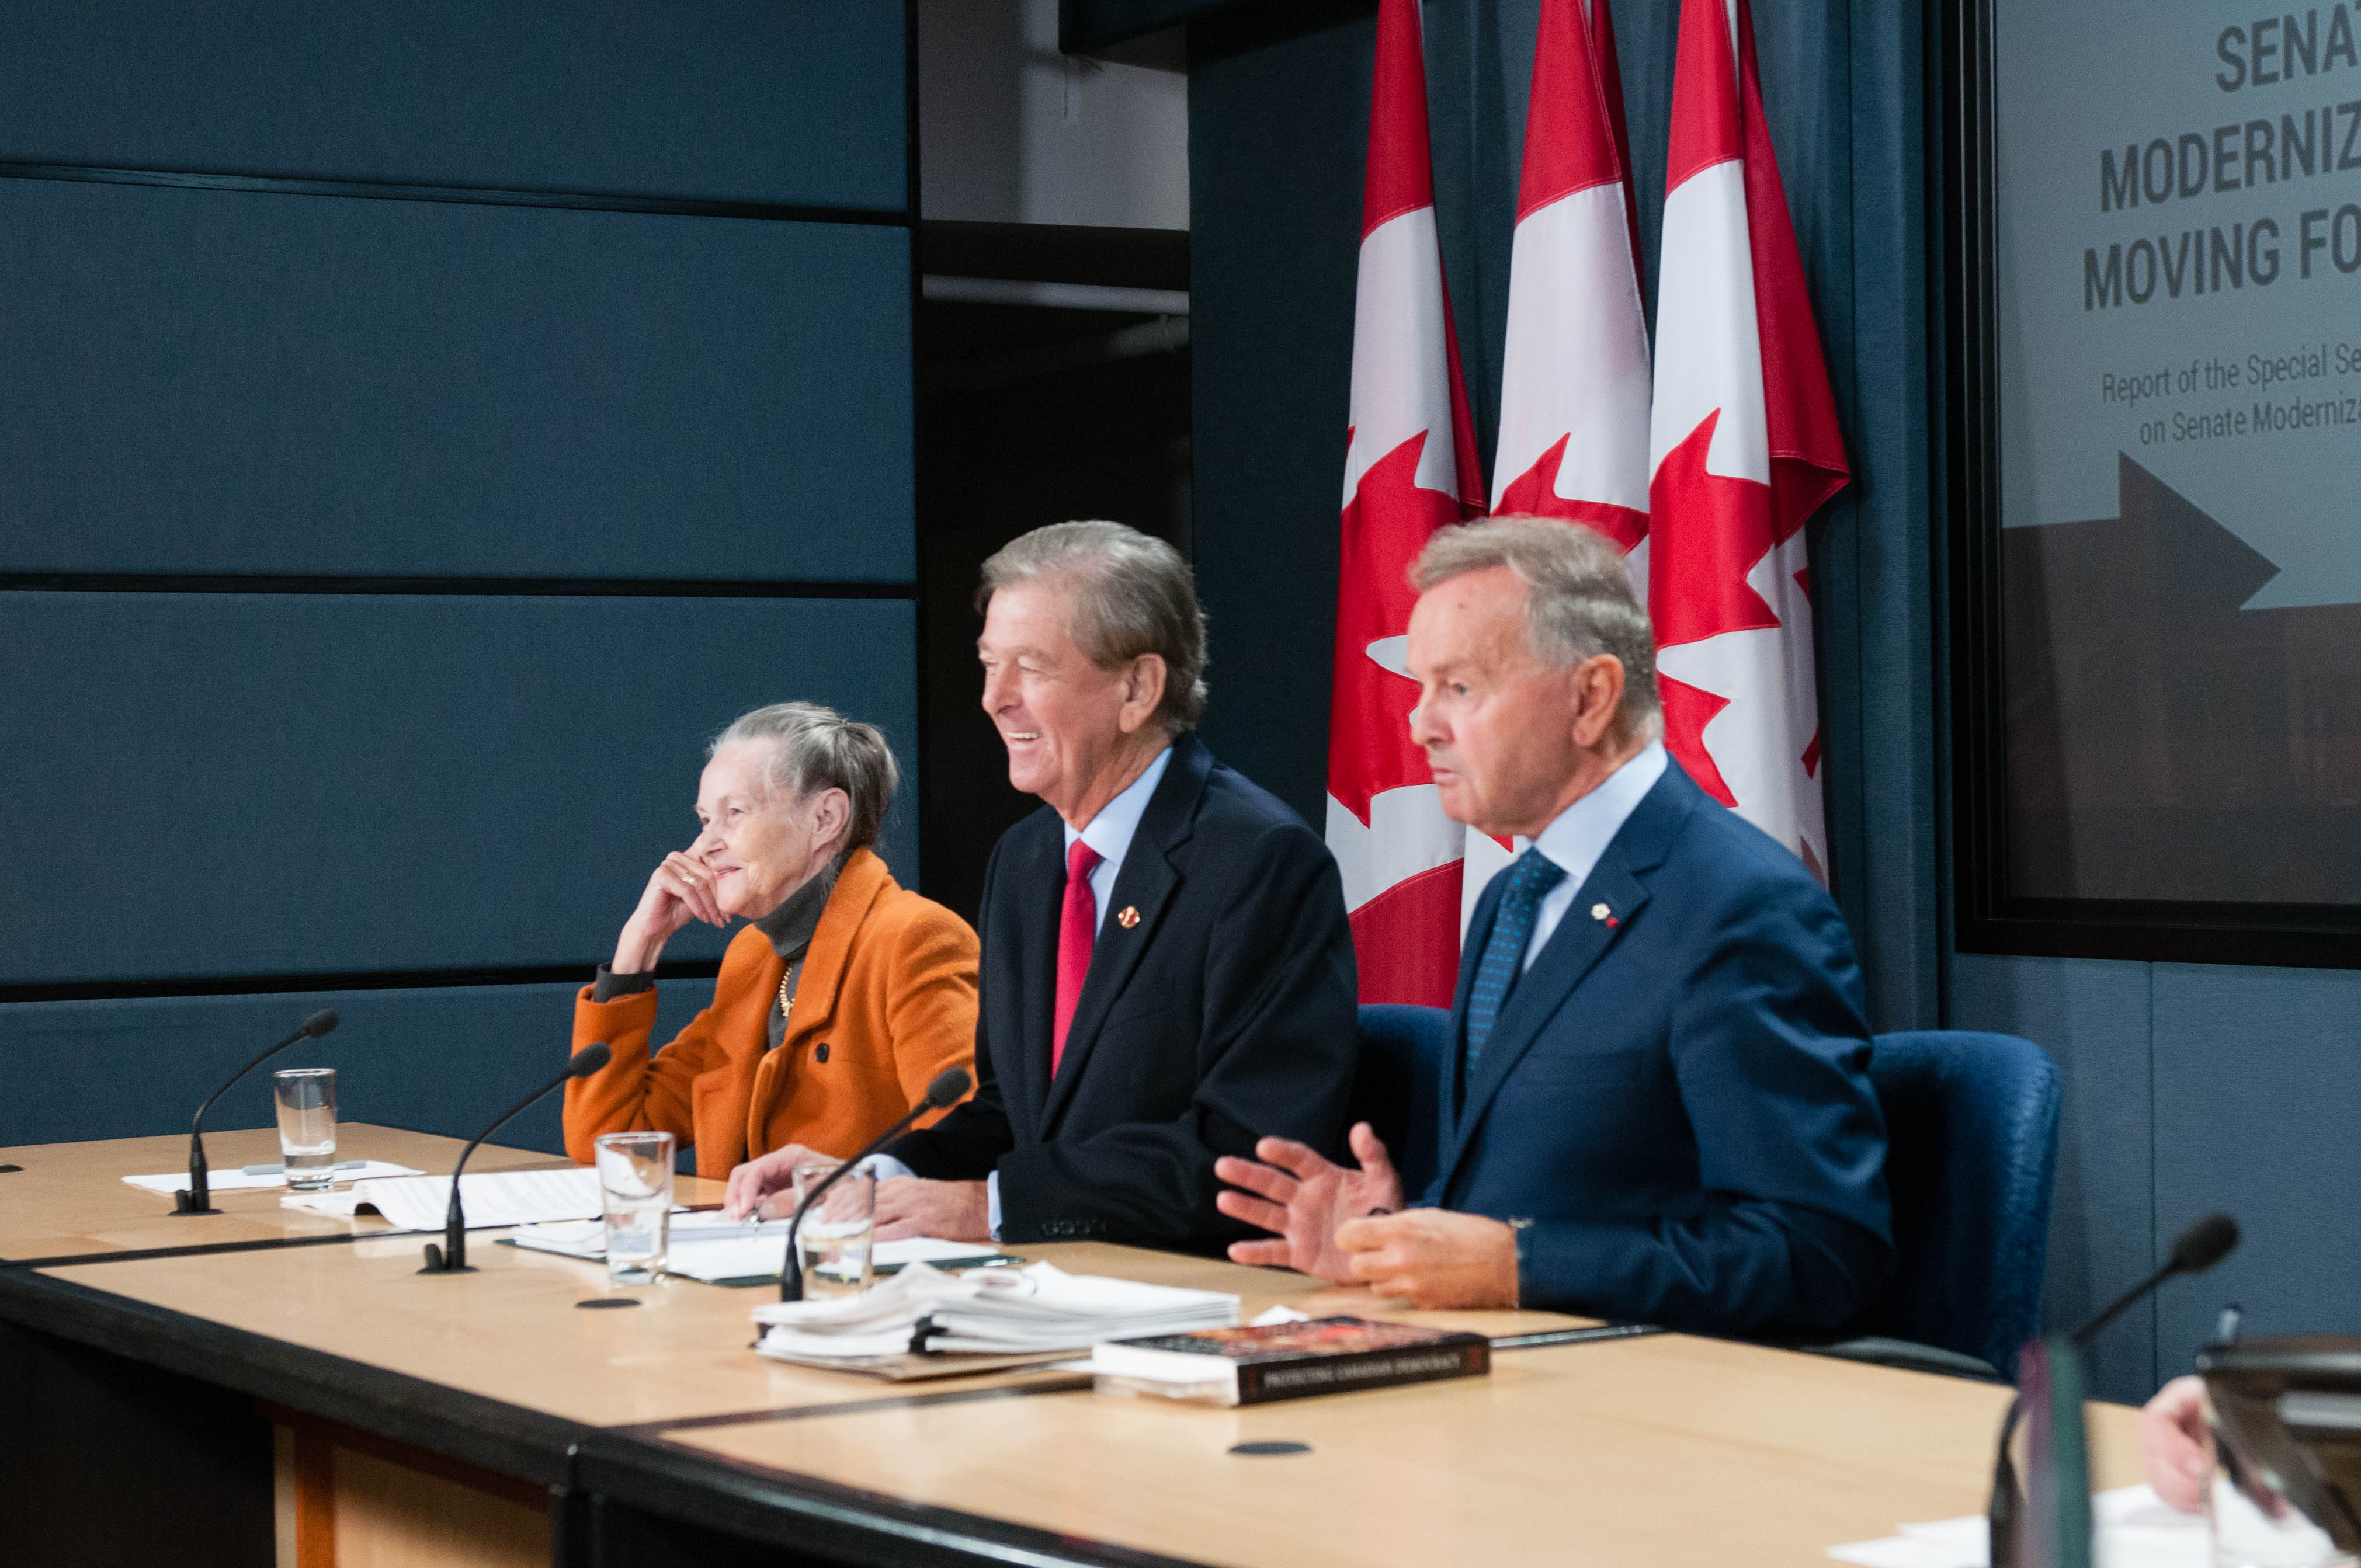 Pictured, from left to right: Senators Elaine McCoy, Thomas McInnis and Serge Joyal announce the Senate’s modernization report at a press conference in Ottawa on October 4, 2016.